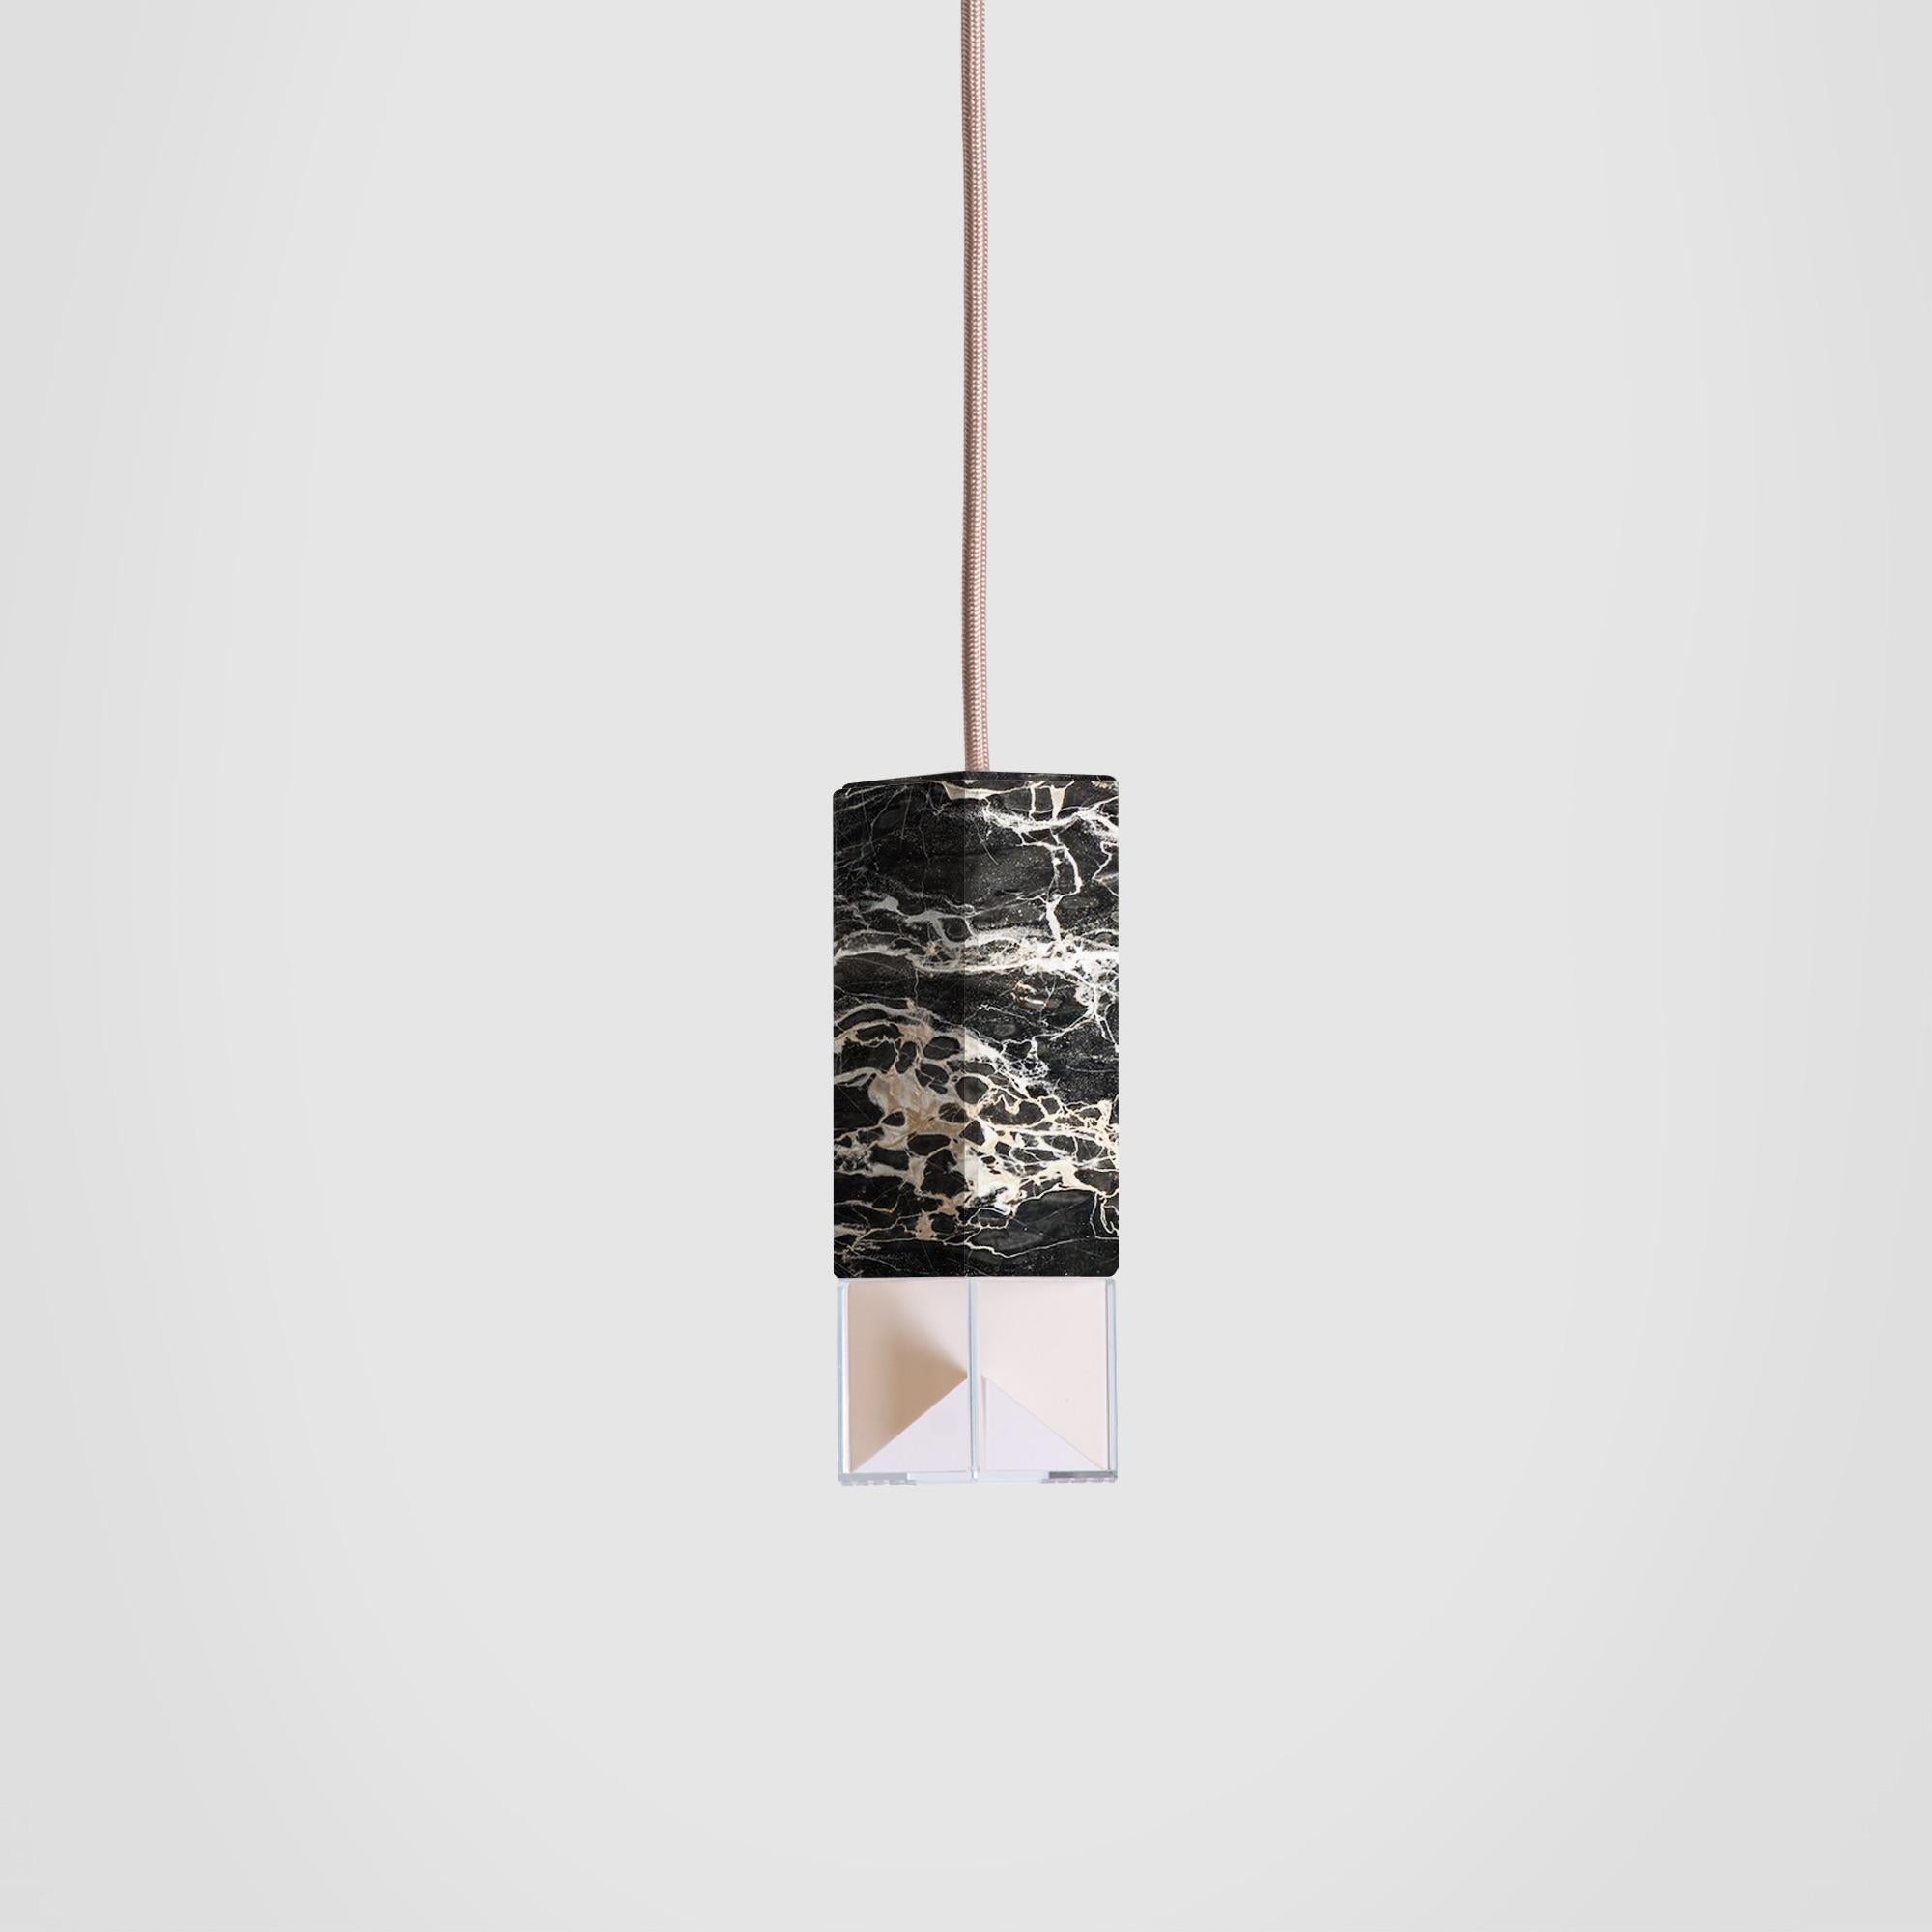 About
Minimalist 6 Light Chandelier Gold Black Marble Handmade by Formaminima

Lamp/One Black Marble 6 Light Chandelier from Black Edition
Design by Formaminima
Chandelier
Materials:
Body lamp handcrafted in Black Portoro Gold vein solid marble /